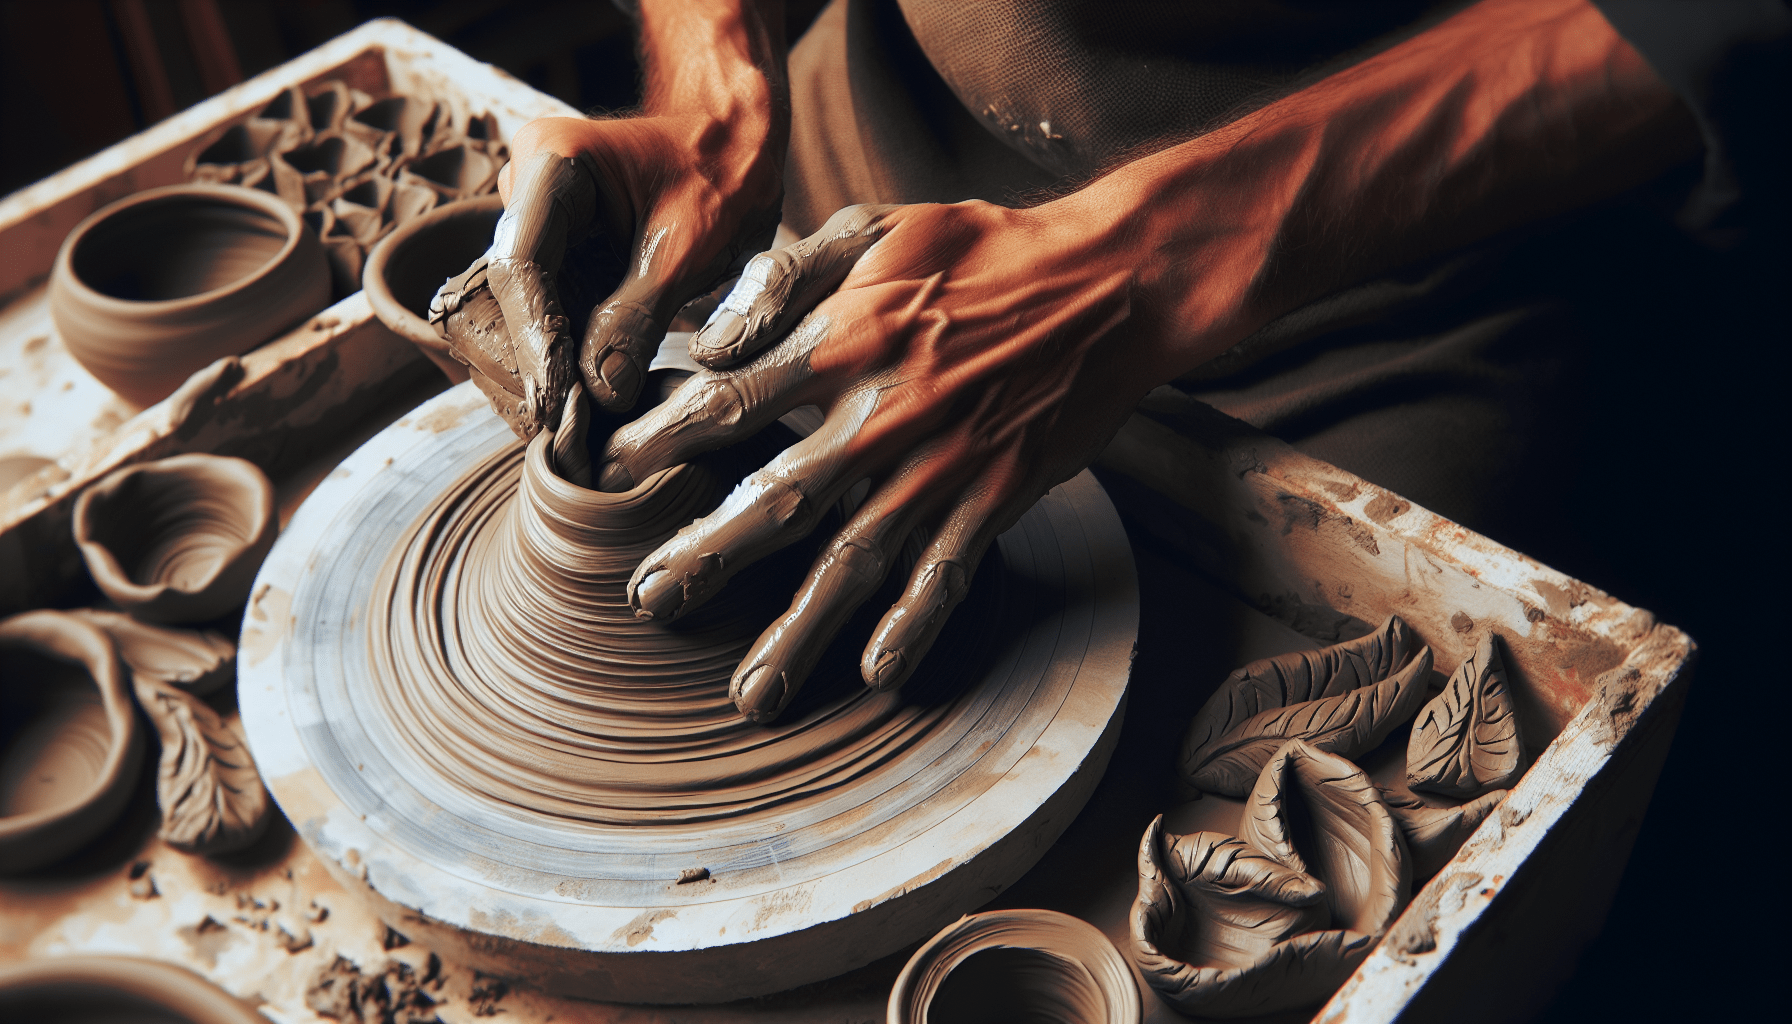 What Are The Techniques Of Building Clay?